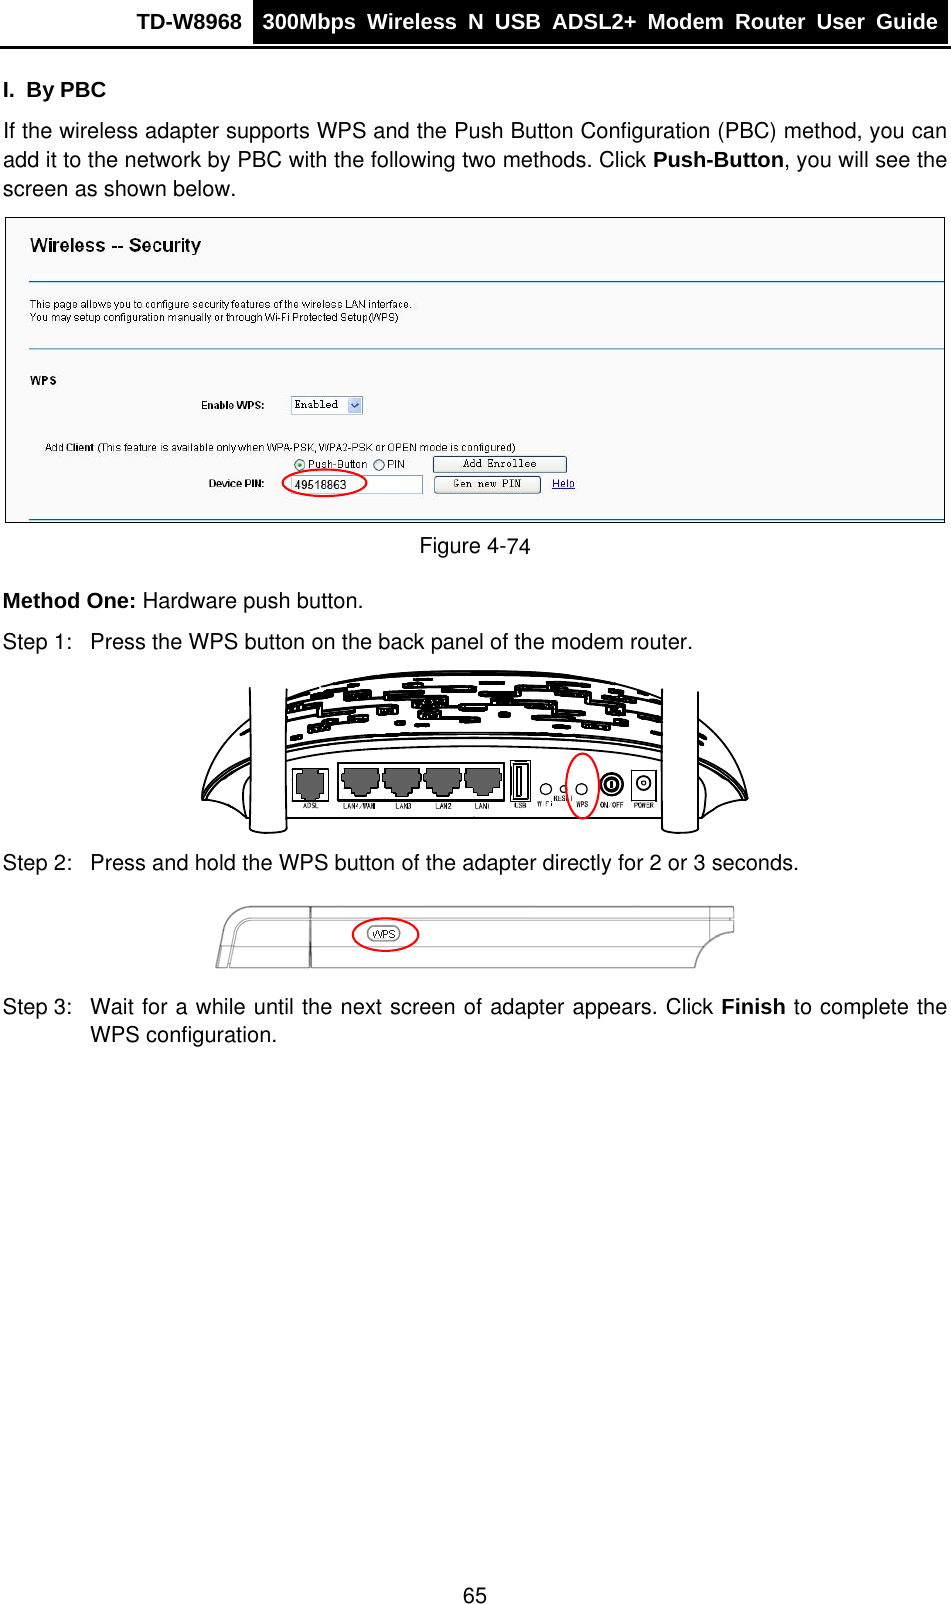 TD-W8968  300Mbps Wireless N USB ADSL2+ Modem Router User Guide  I. By PBC If the wireless adapter supports WPS and the Push Button Configuration (PBC) method, you can add it to the network by PBC with the following two methods. Click Push-Button, you will see the screen as shown below.  Figure 4-74 Method One: Hardware push button. Step 1:  Press the WPS button on the back panel of the modem router.  Step 2:  Press and hold the WPS button of the adapter directly for 2 or 3 seconds.  Step 3:  Wait for a while until the next screen of adapter appears. Click Finish to complete the WPS configuration. 65 